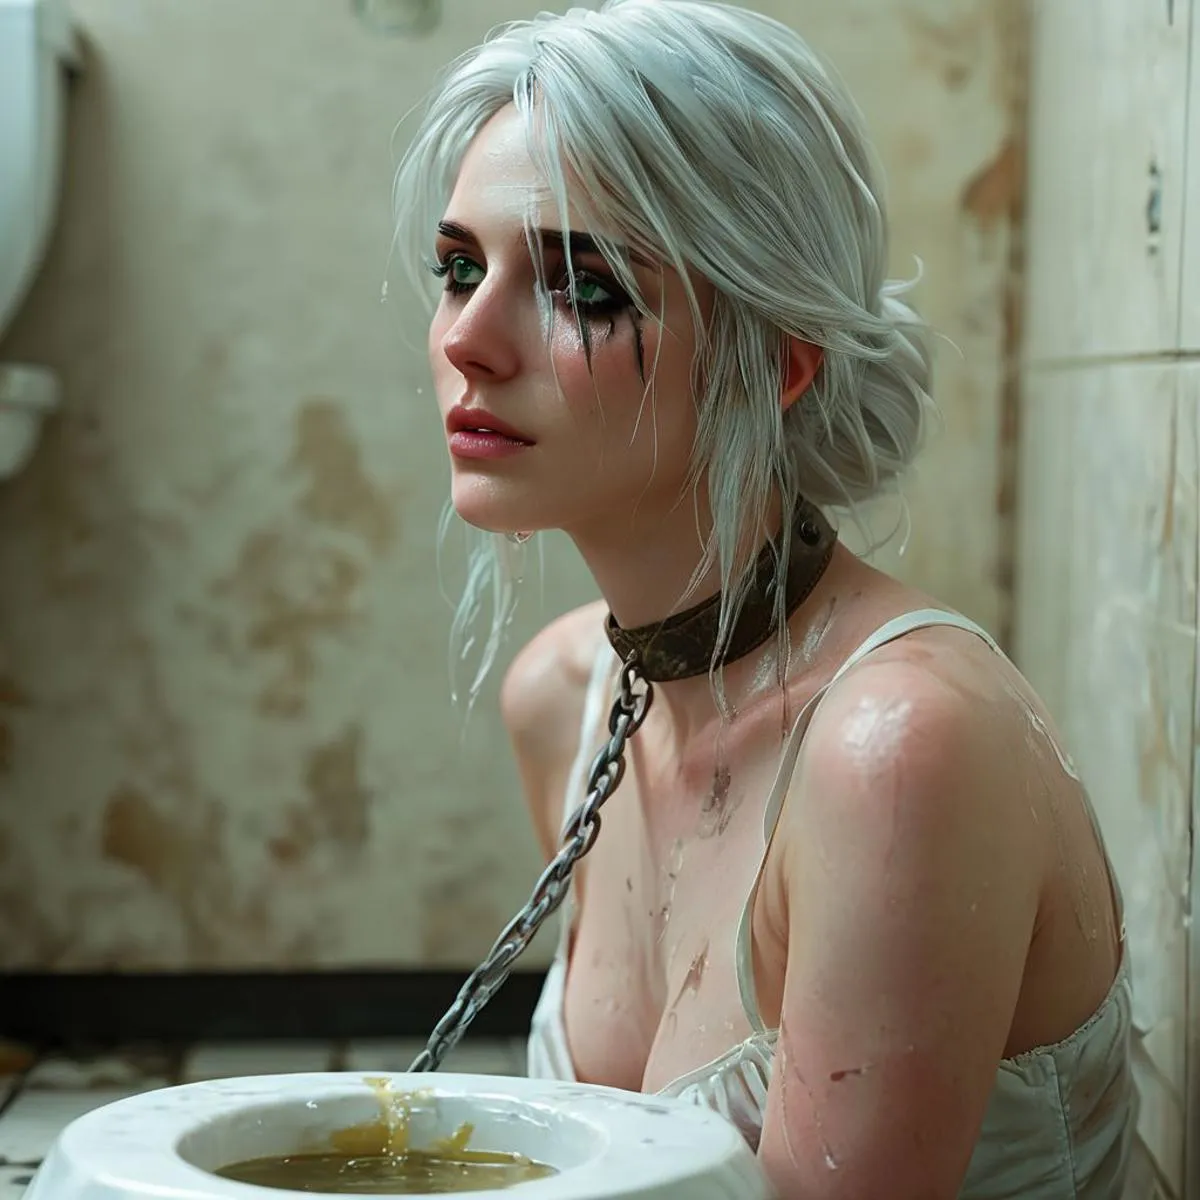 A distressed woman with white hair, chained by the neck in a dingy, dimly lit dungeon-like bathroom, generated using stable diffusion AI.